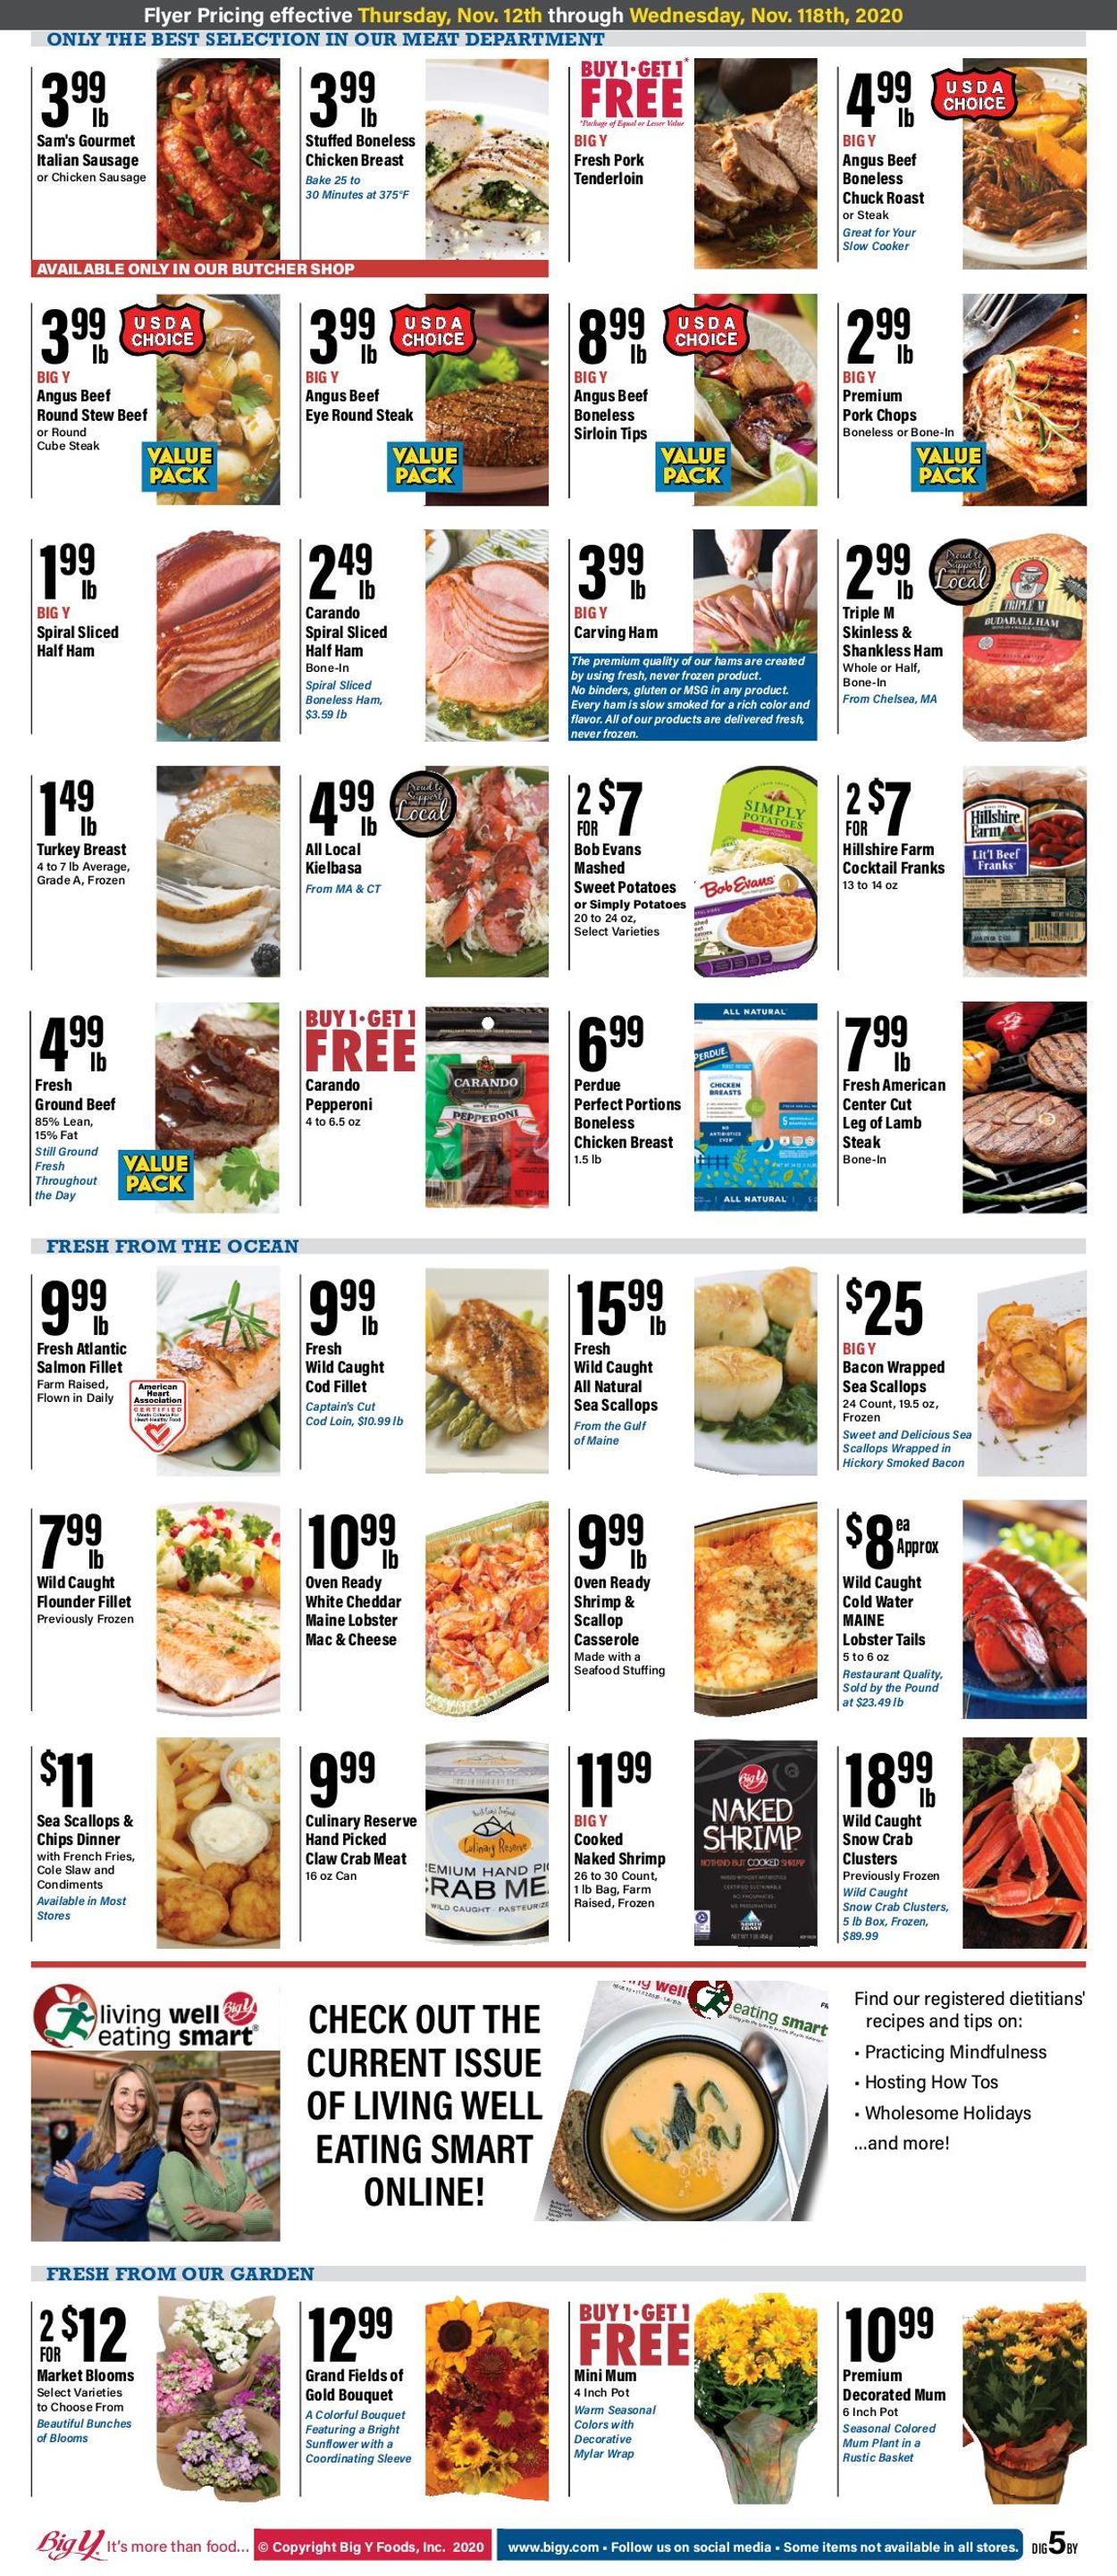 Big Y Ad from 11/12/2020